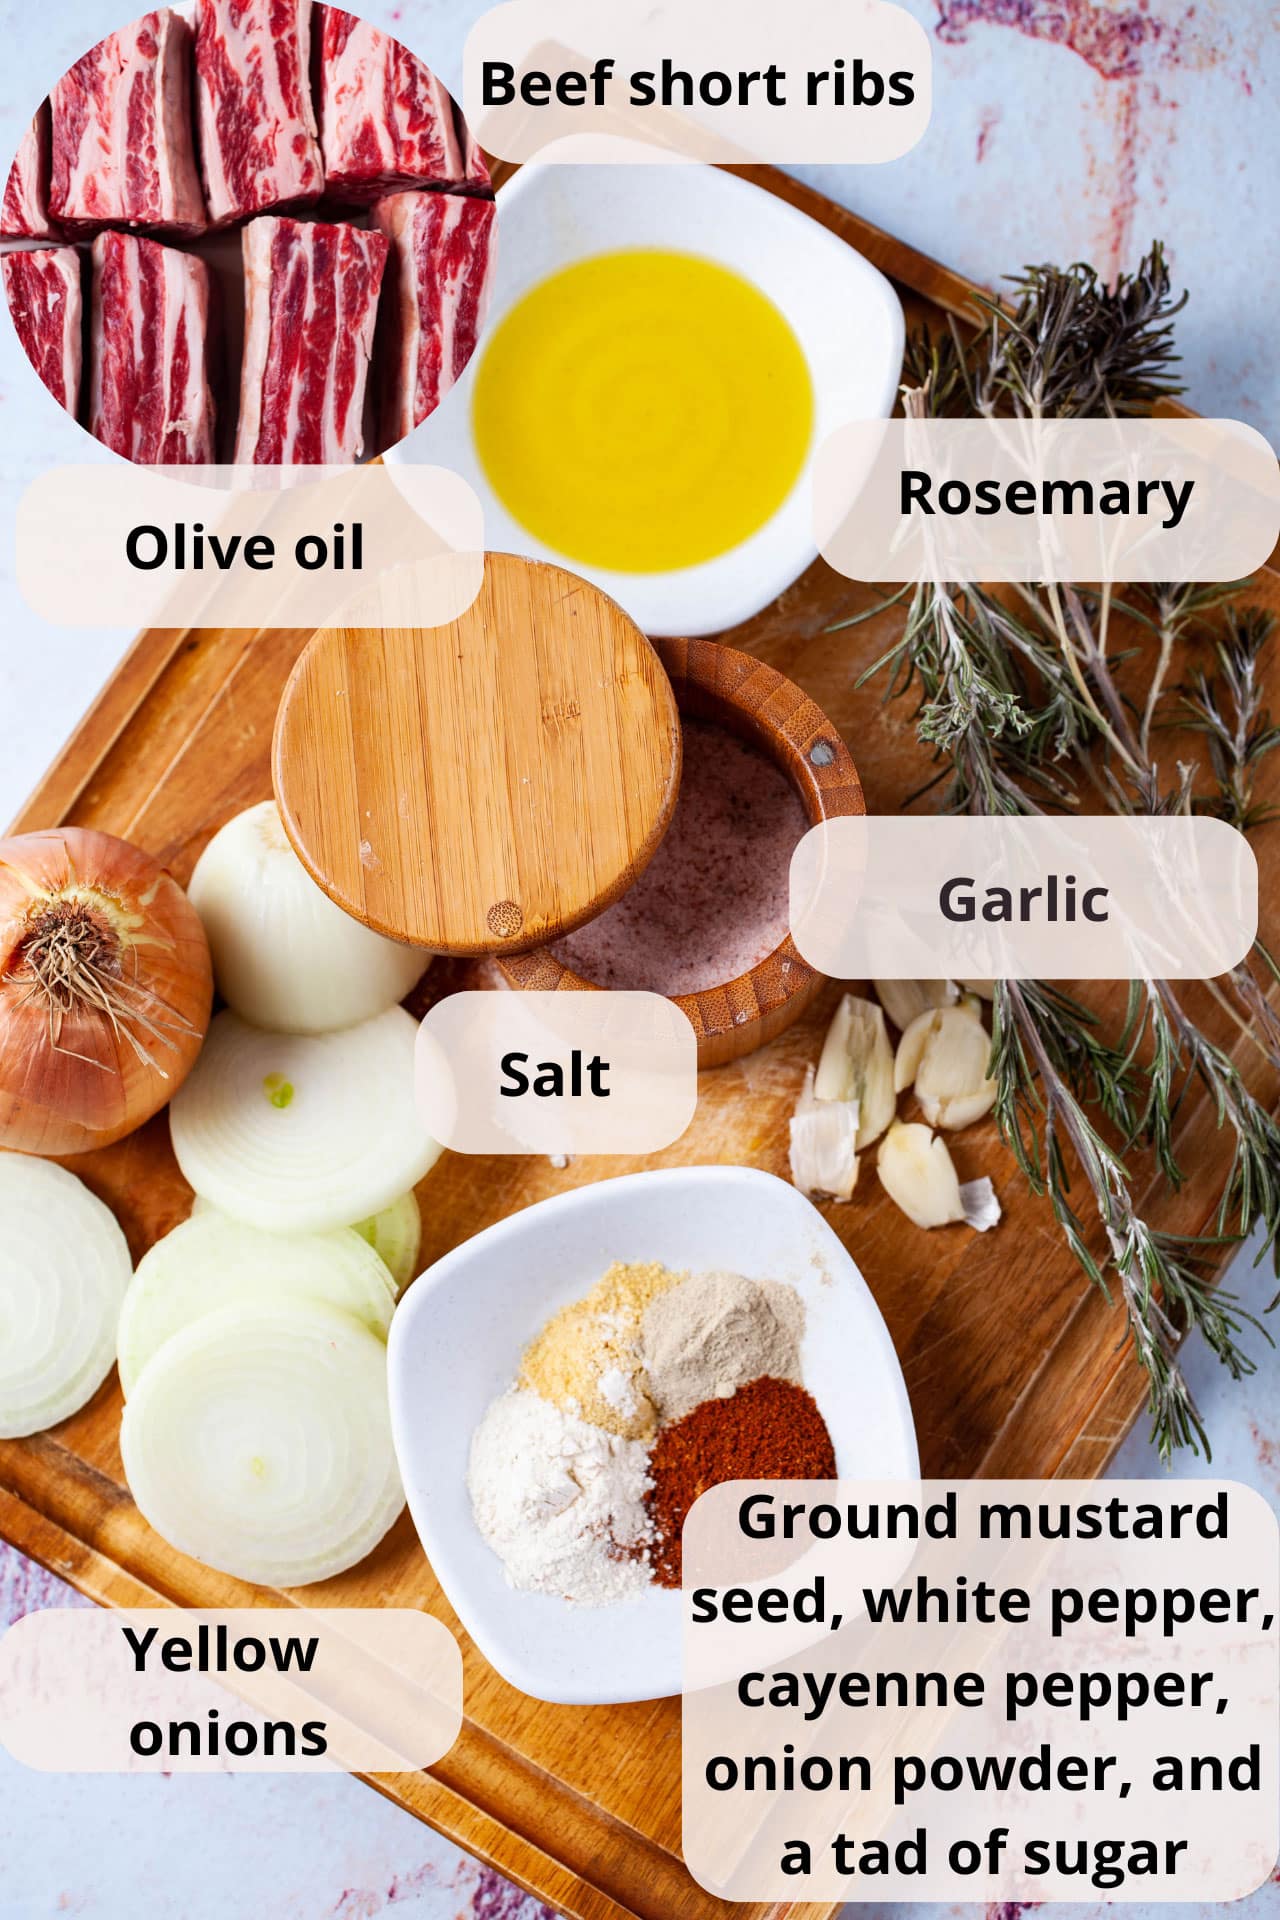 A wooden board containing sliced onions, a bowl of spices, a salt pot, olive oil, garlic, and dried Rosemary leaves.